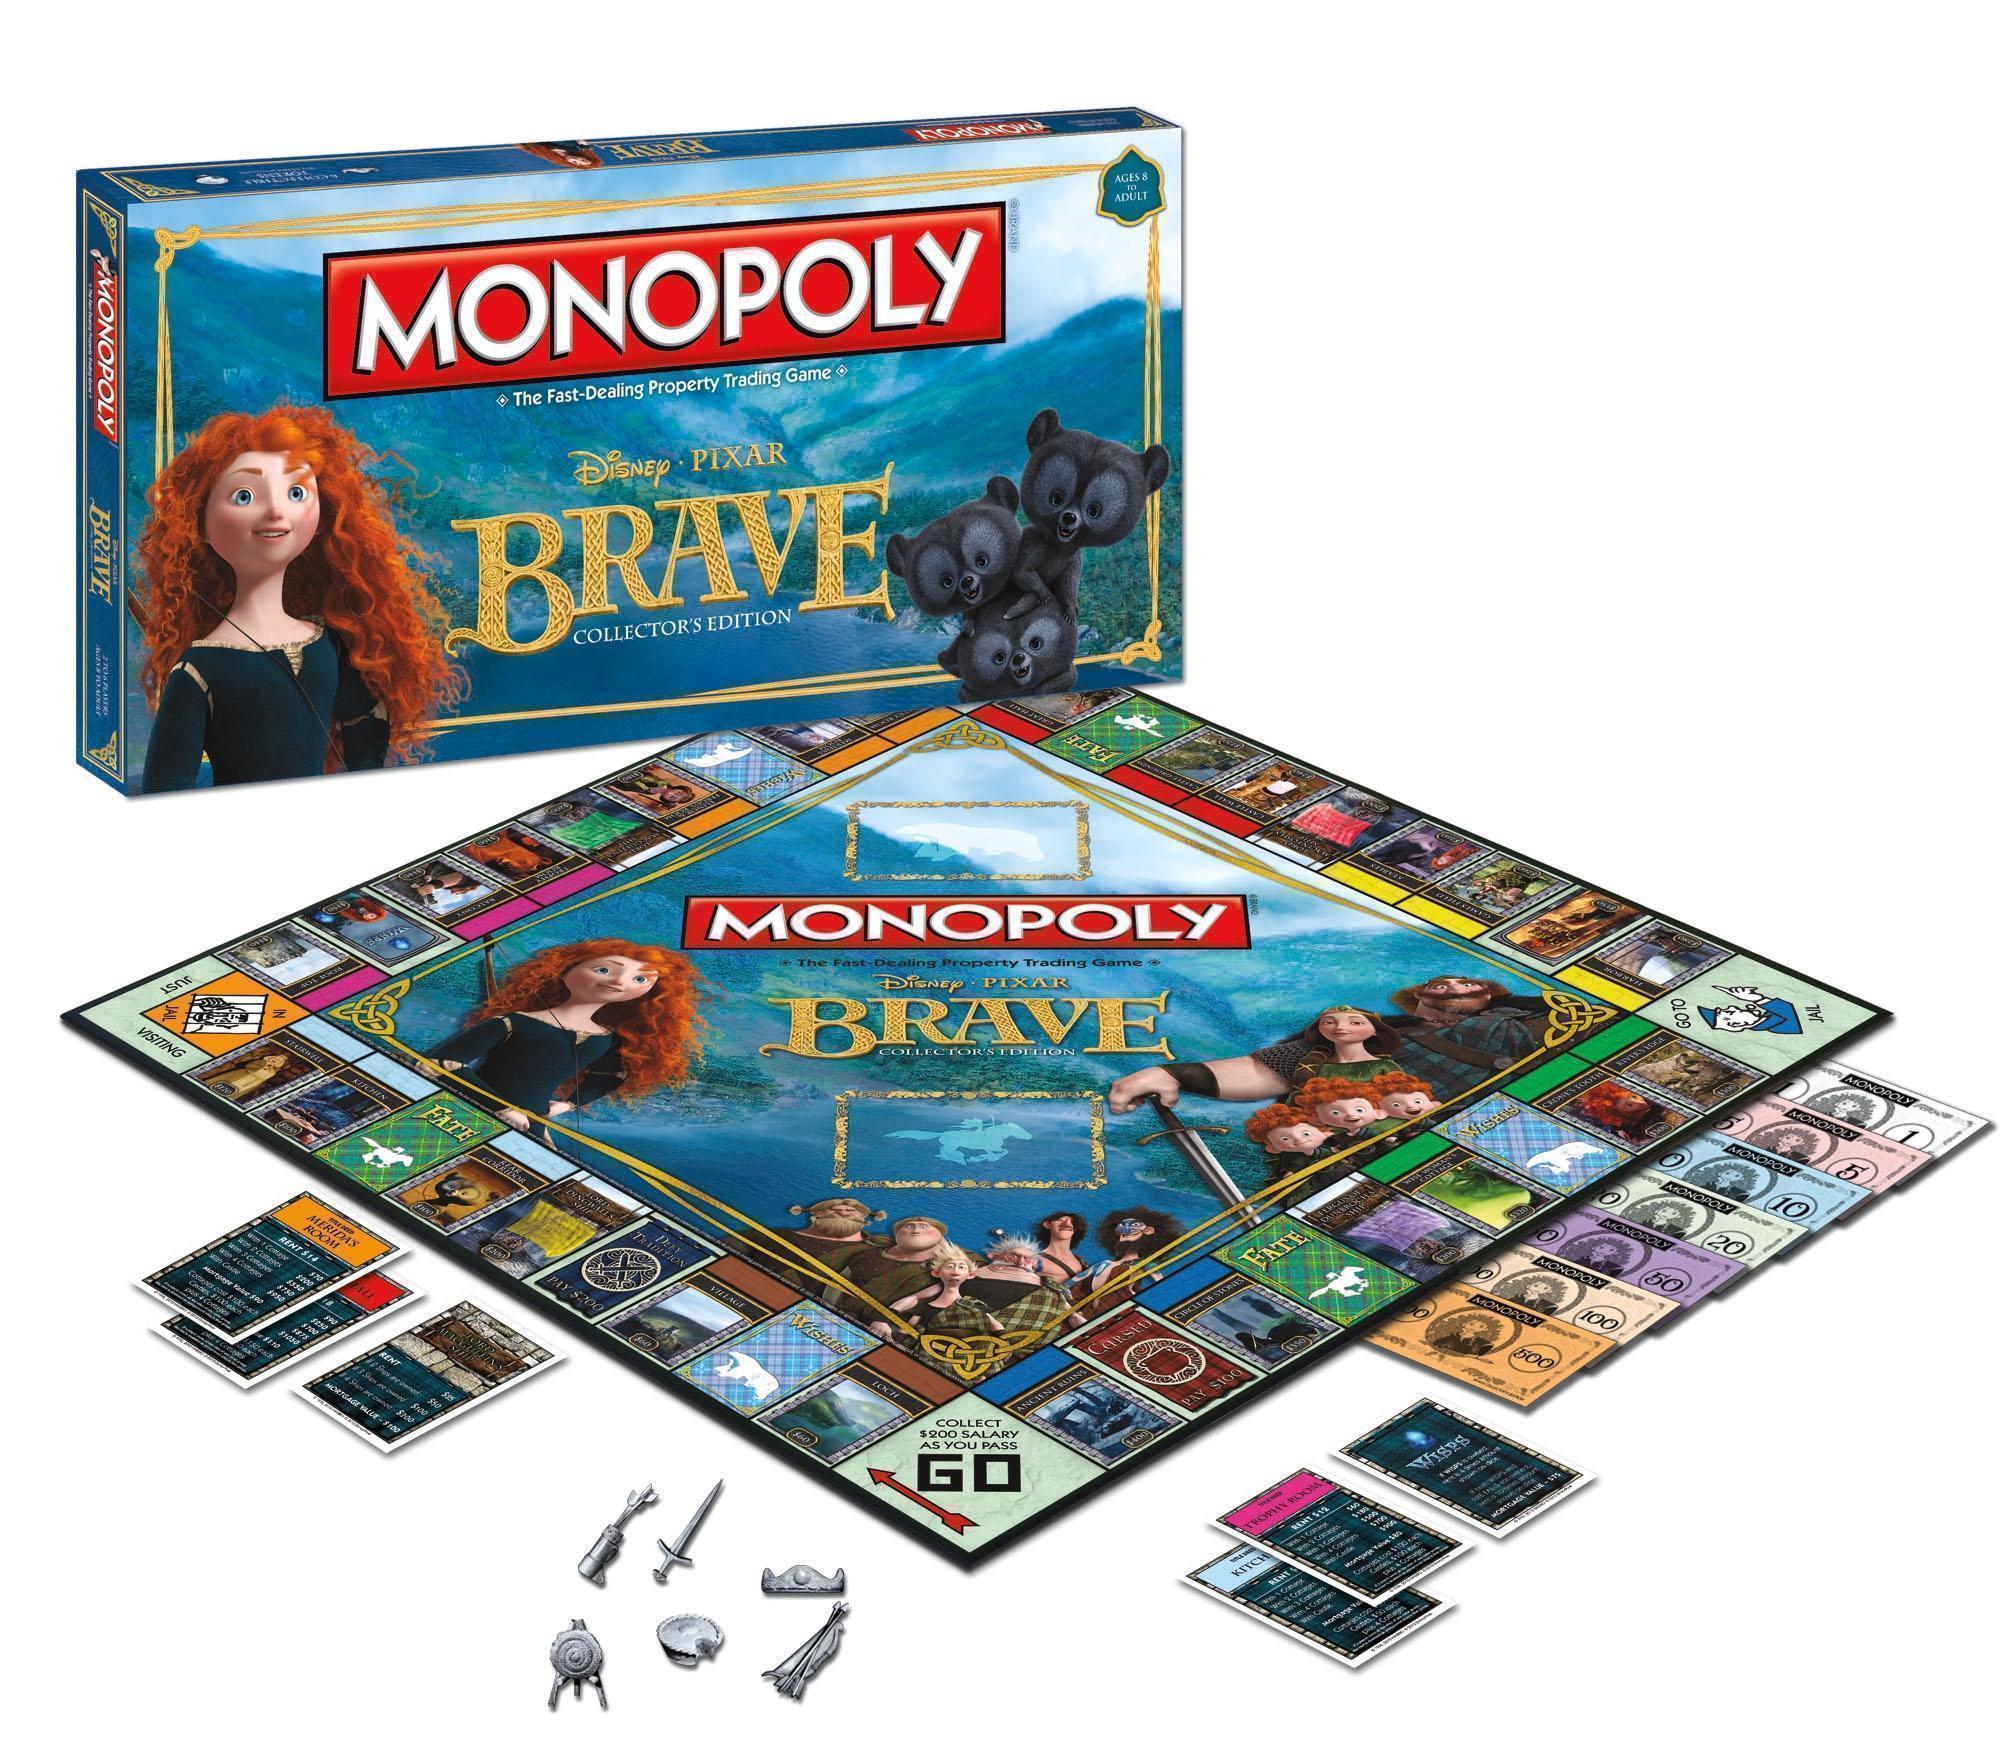 Brave Monopoly The Fast Dealing Property Trading Game Gift Board Collectors